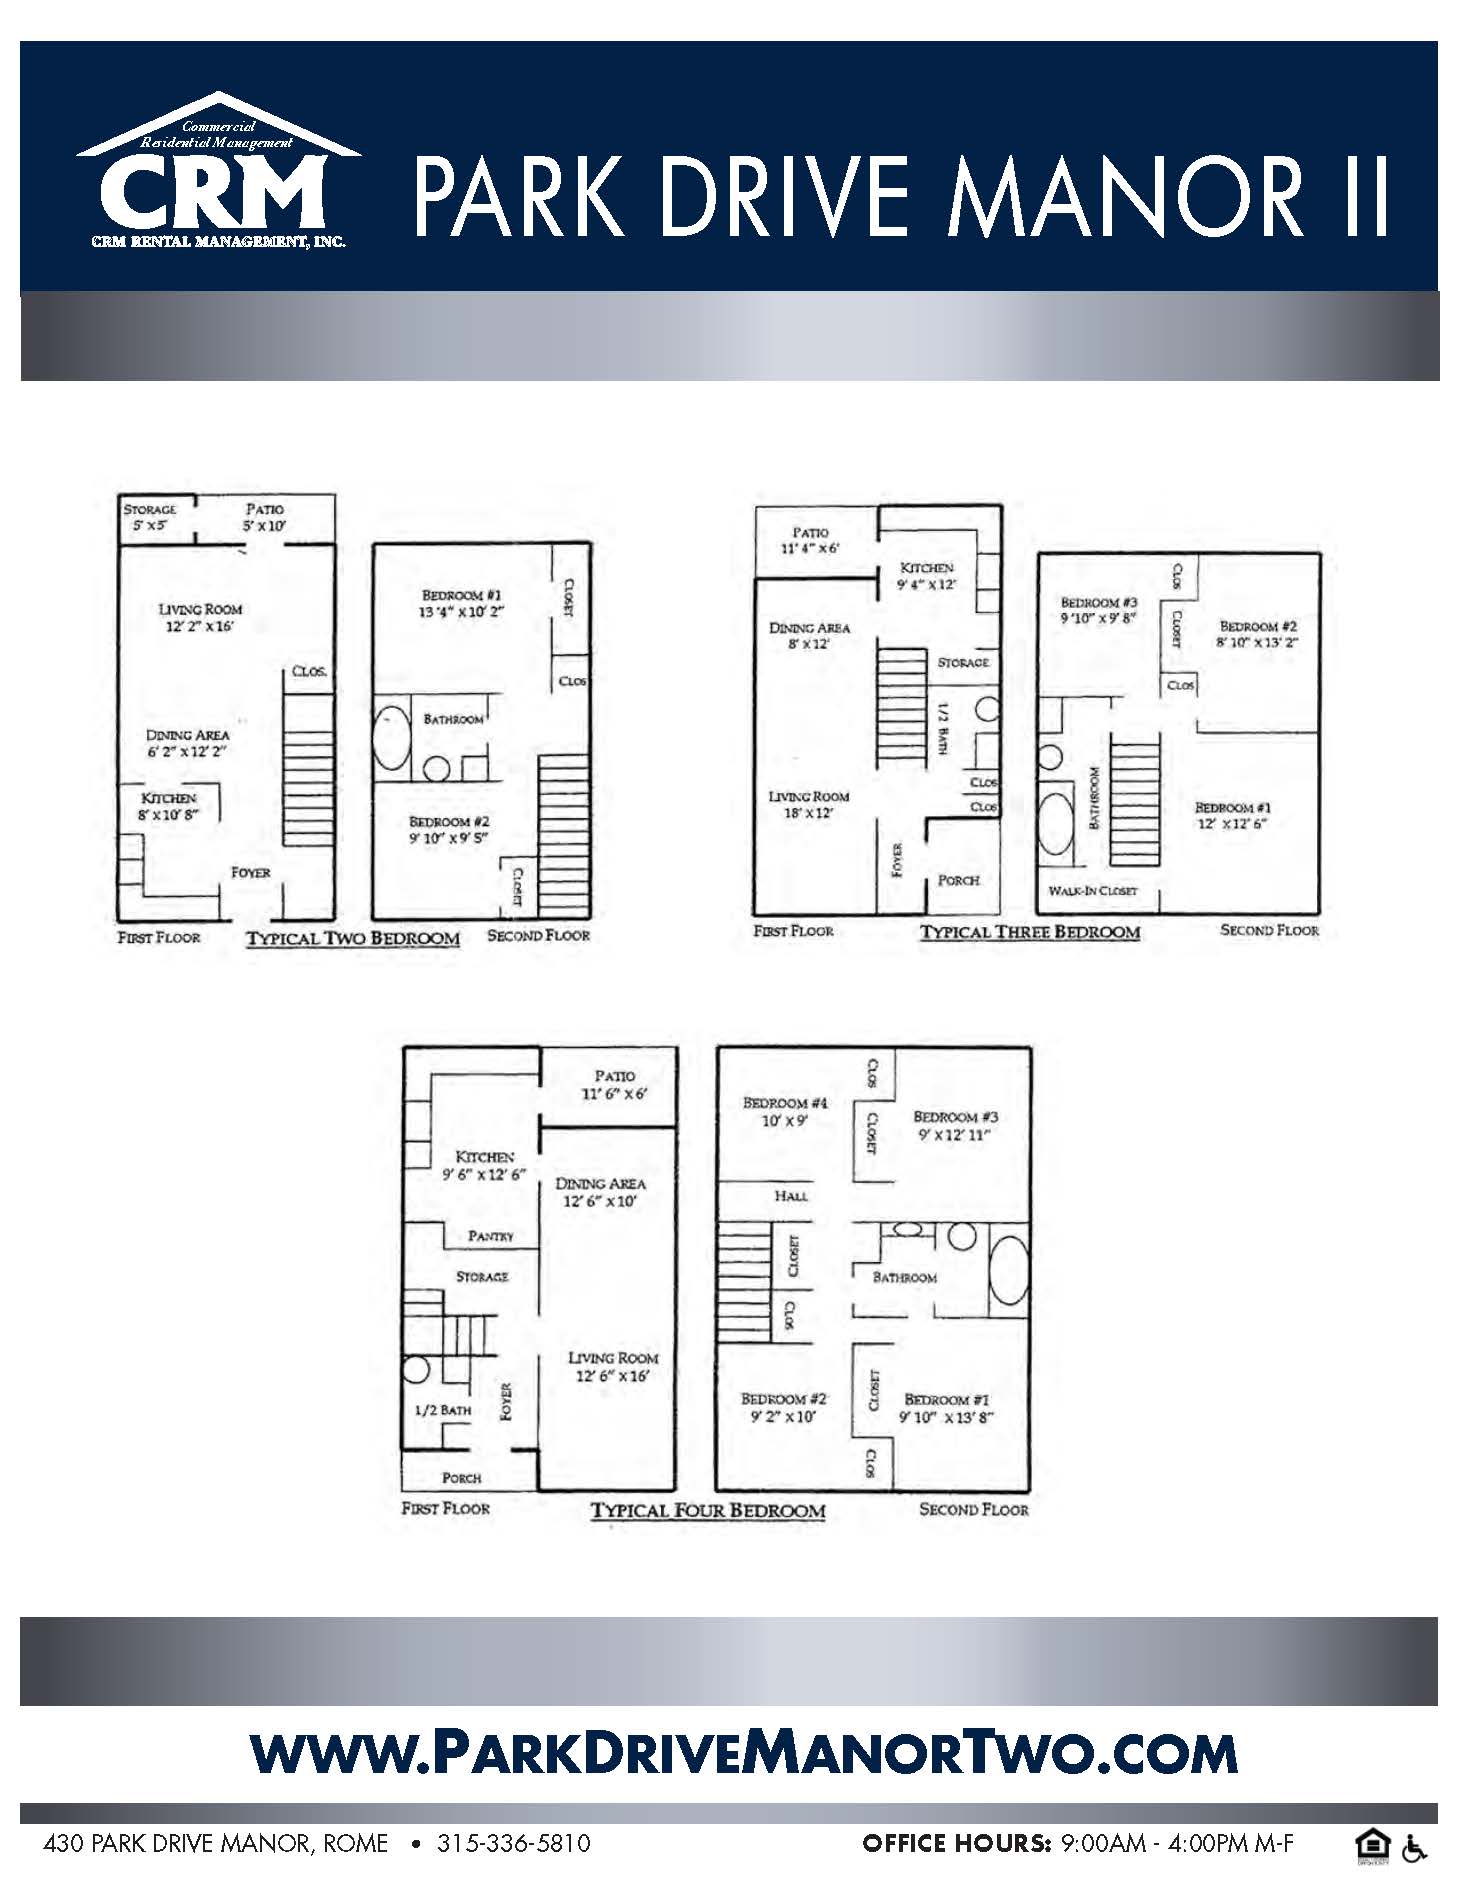 Park Drive Manor 2 Brochure Page 2 of 2